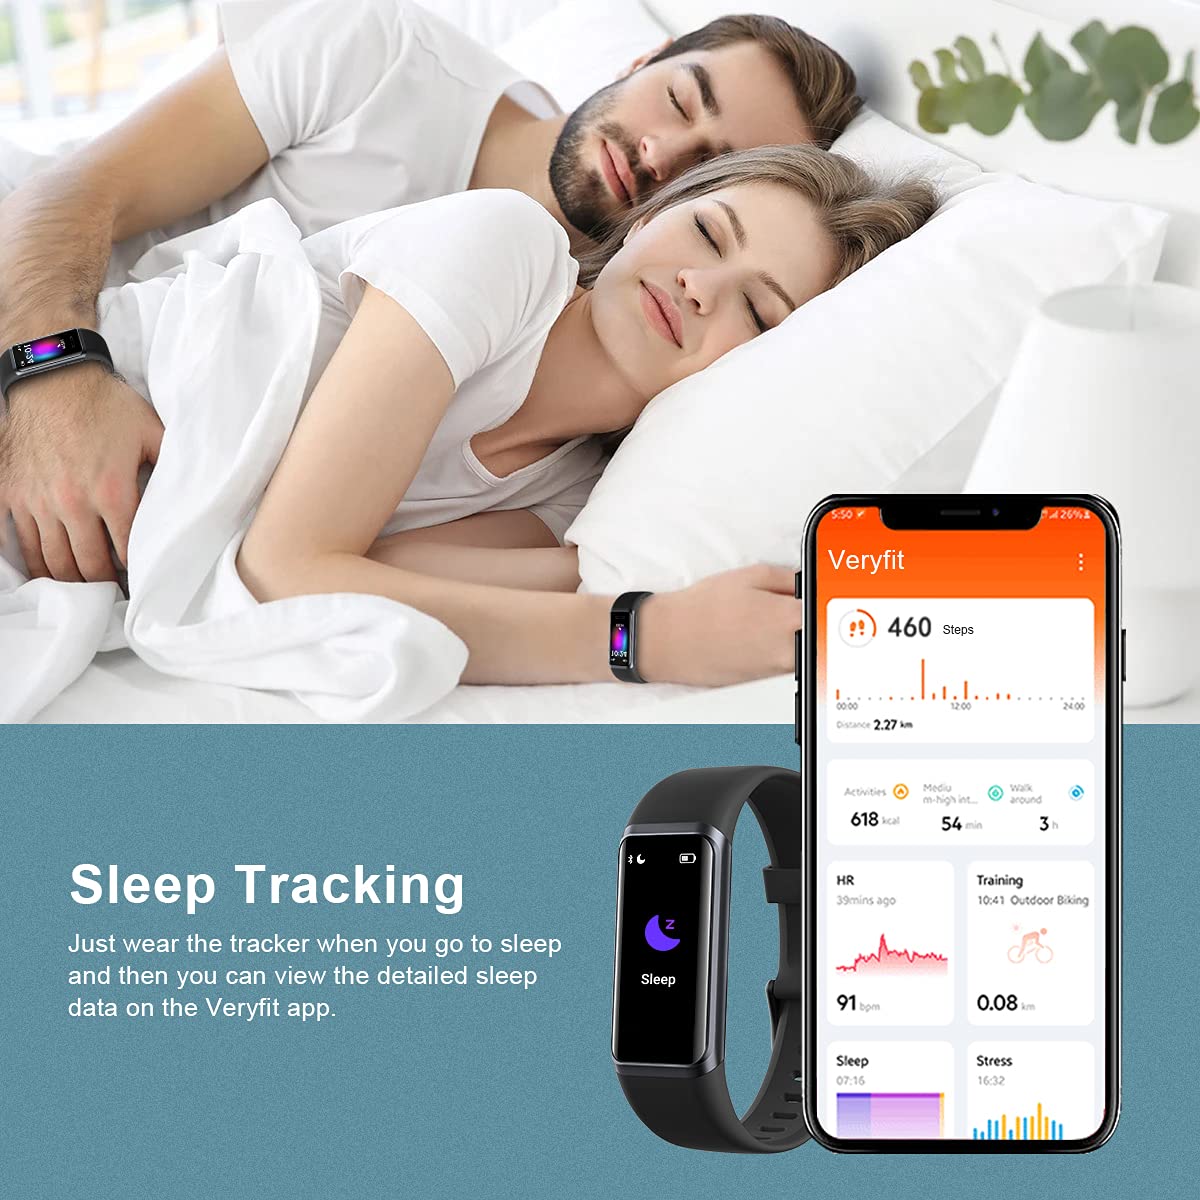 CHEREEKI Fitness Watch, Activity Trackers with Heart Rate Monitor and Sleep Monitor, IP68 Waterproof Smart Watch with Alexa Built-in, Step/Calorie Counter, Pedometer Watch for Women Men (Black)